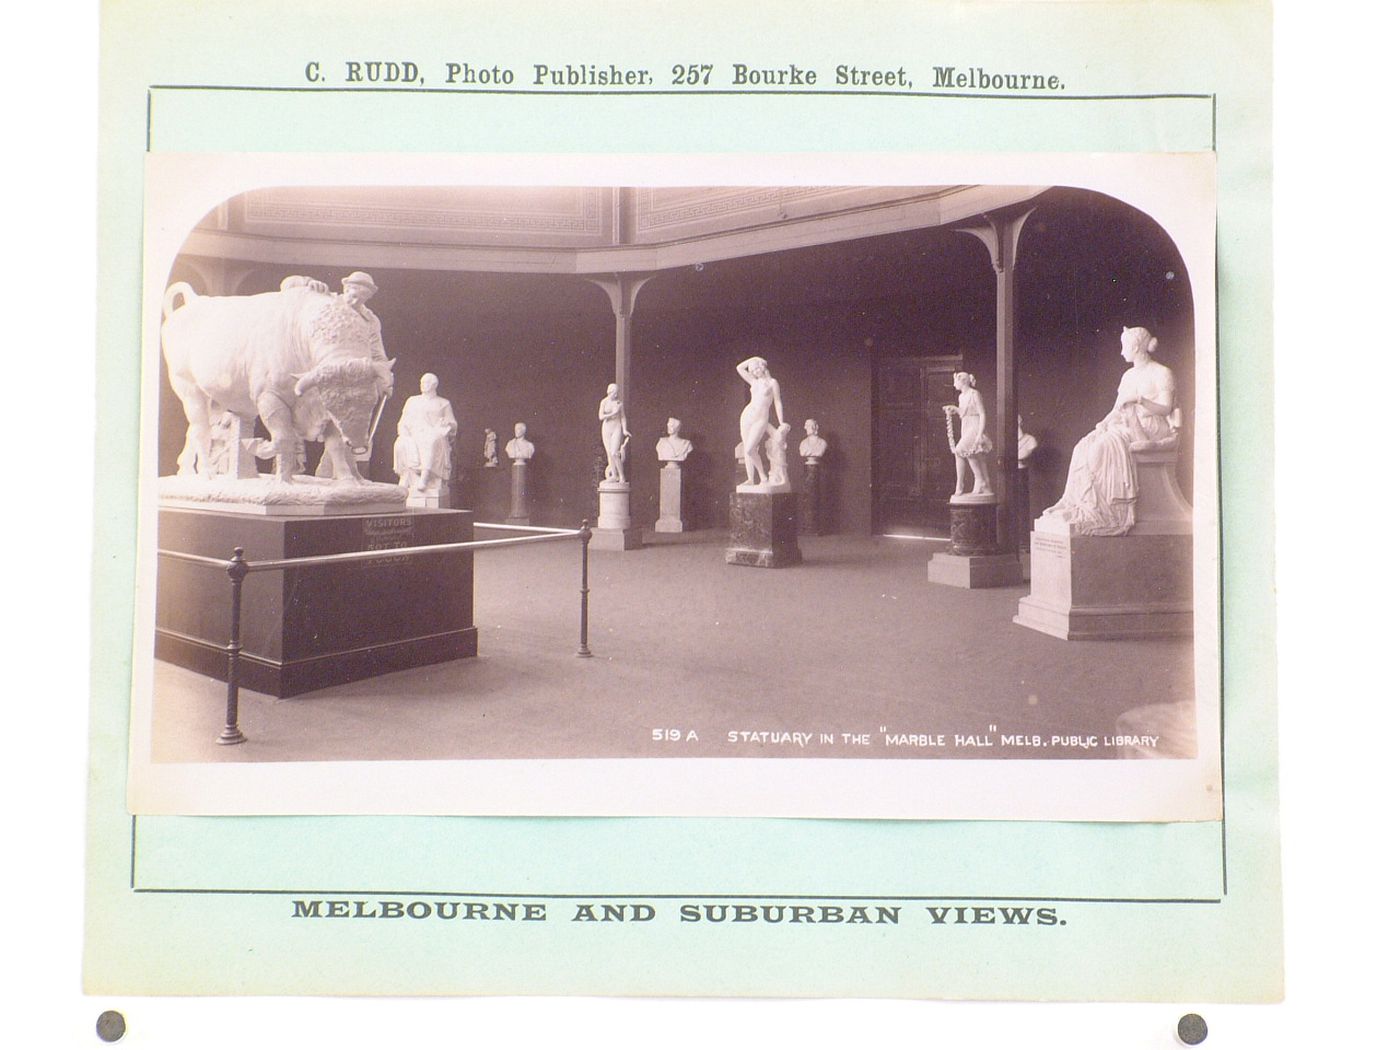 Interior view of statues and busts in the Marble Hall of Melbourne Public Library (now the State Library of Victoria), Australia